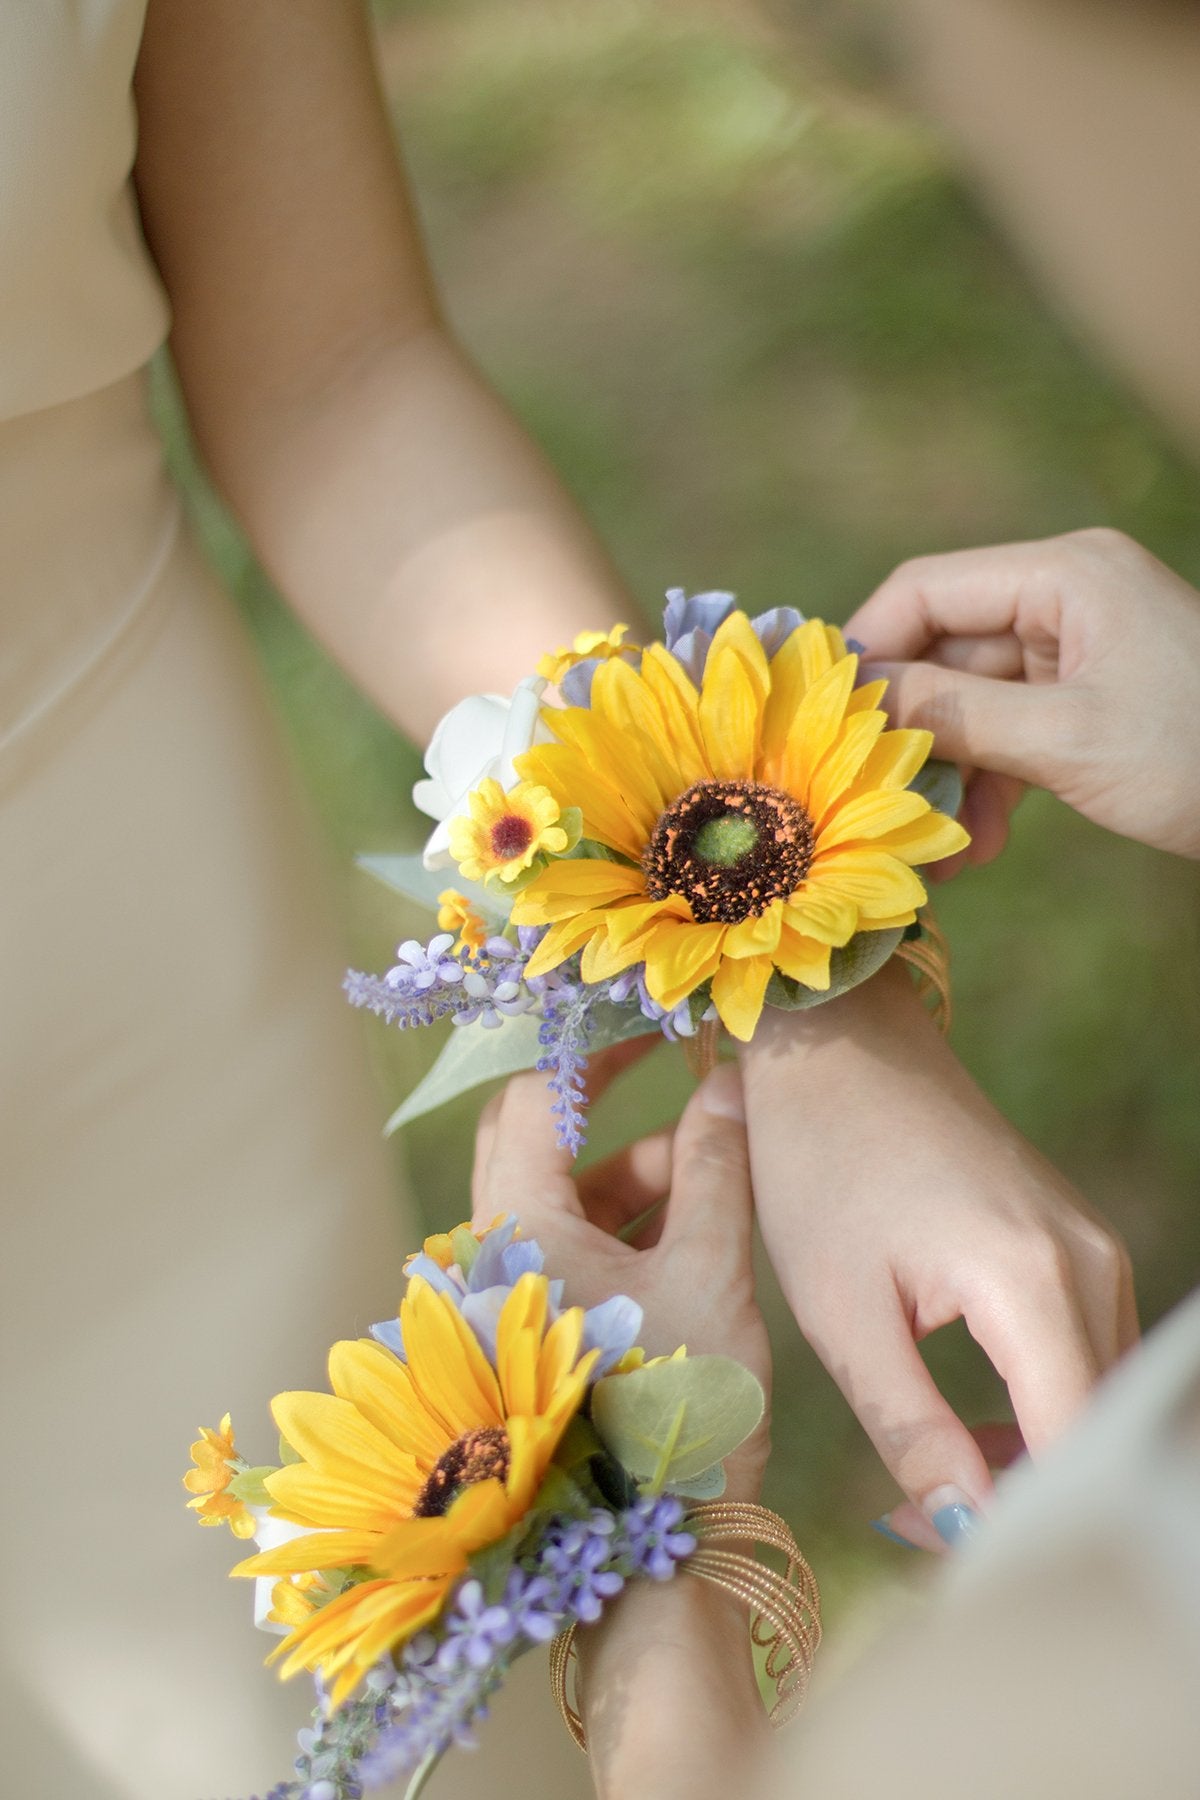 Wrist Corsages (Set of 6) - Sunflowers - lingsDev